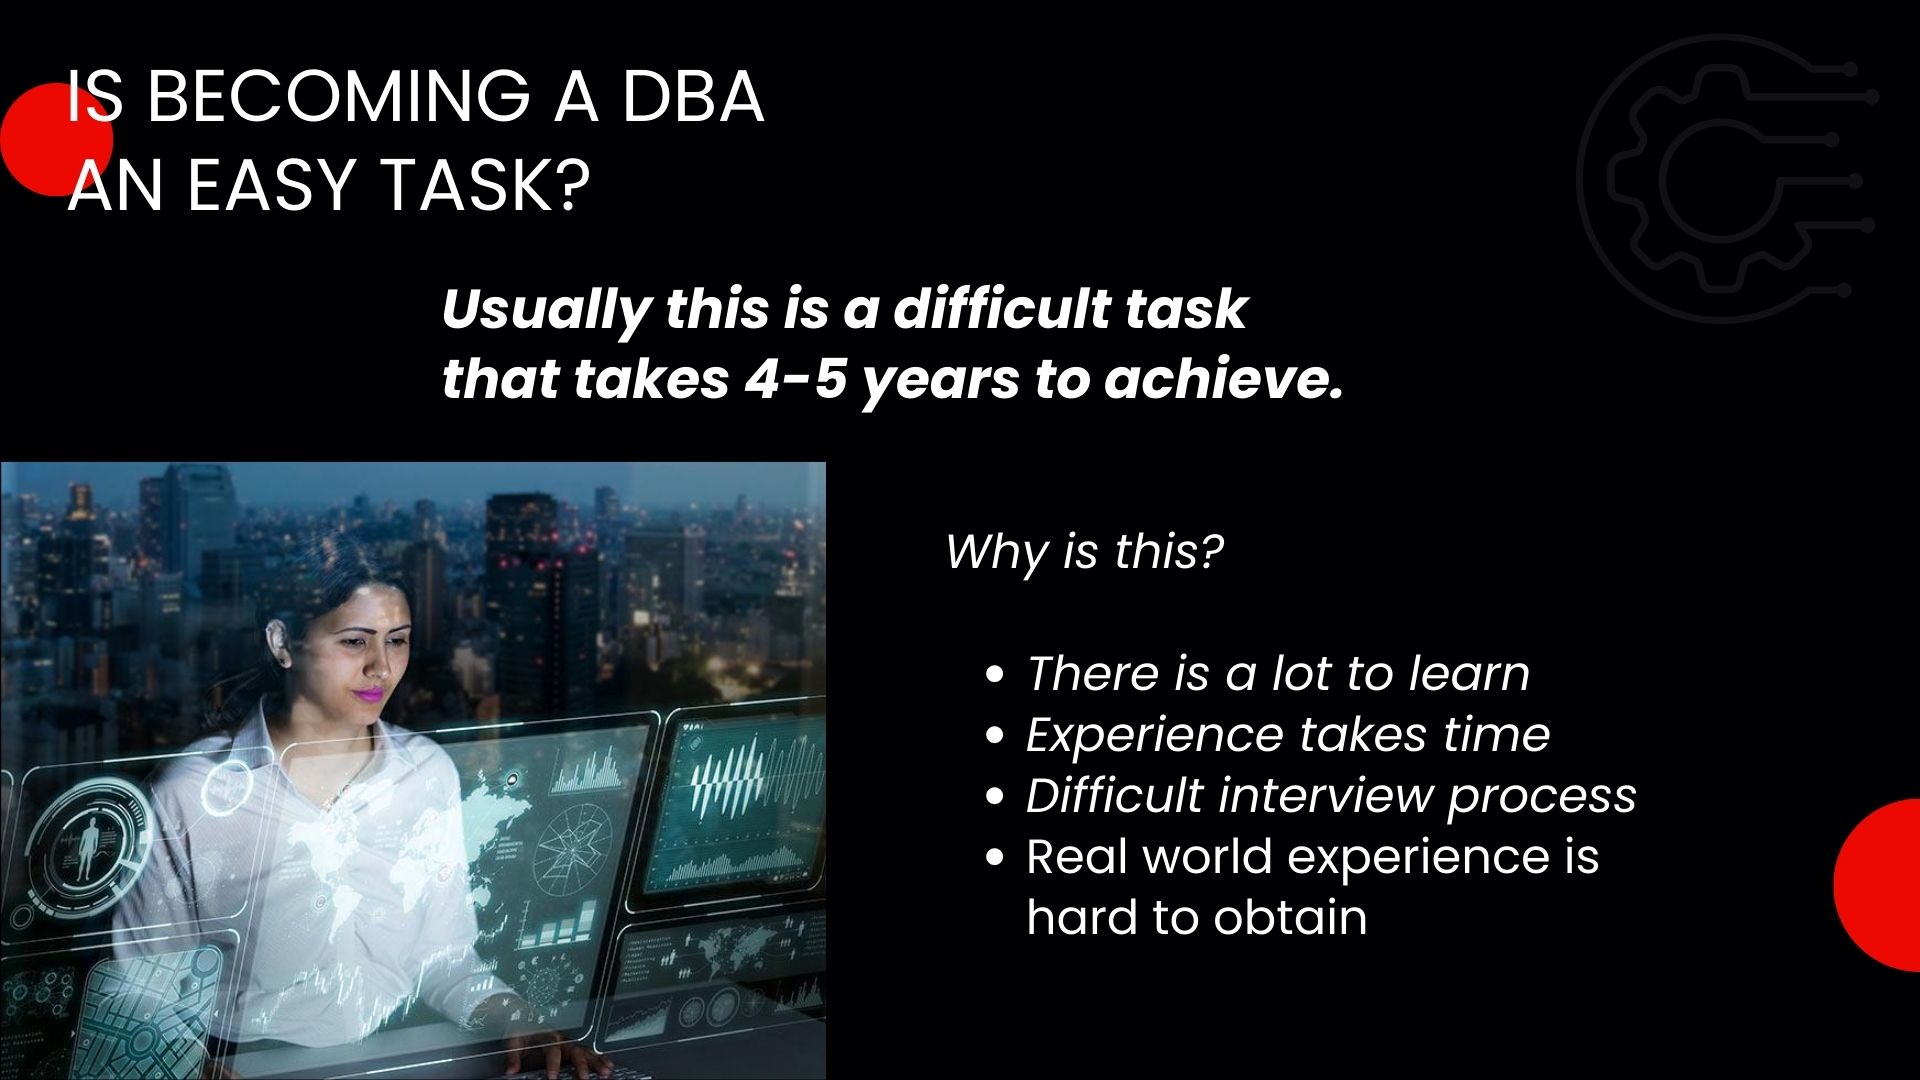 Is Becoming A DBA An Easy Task